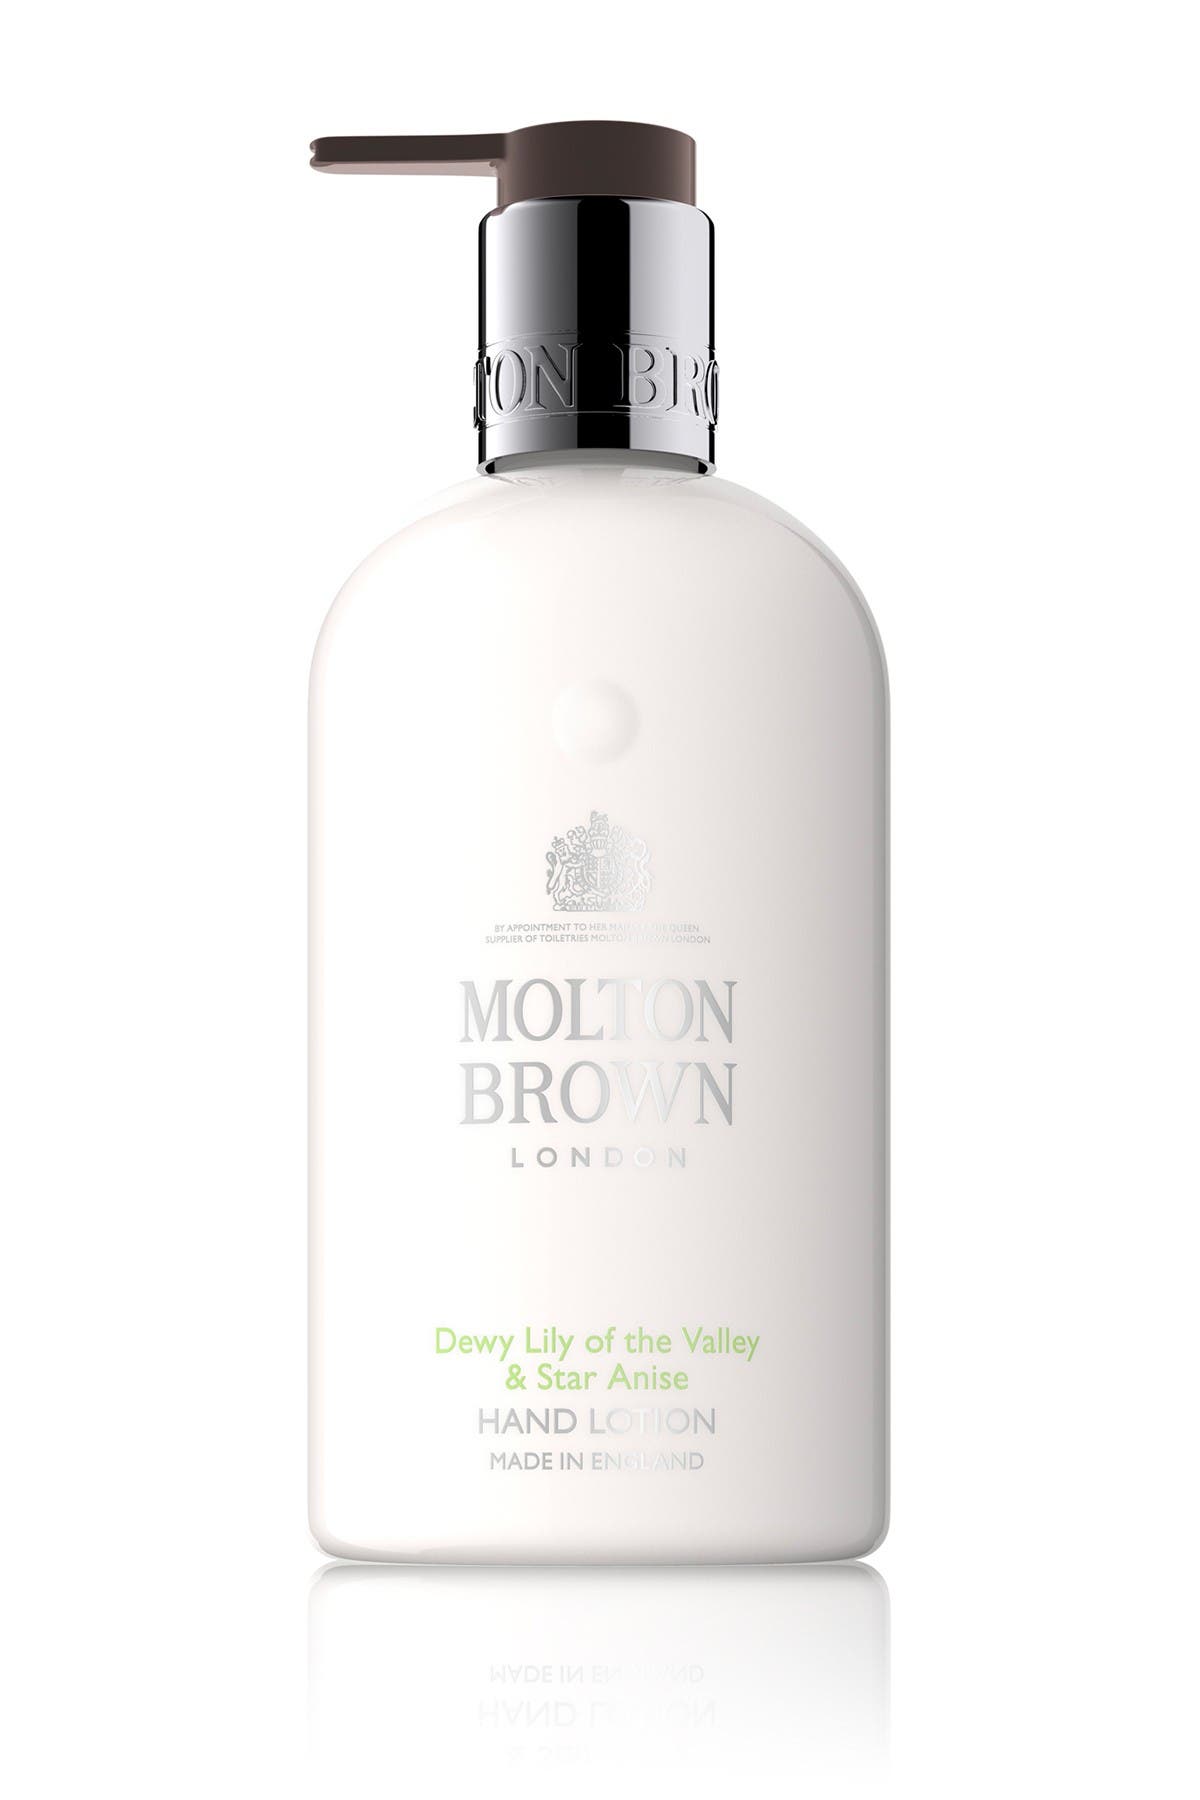 Molton Brown Dewy Lily Of The Valley & Star Anise Hand Lotion